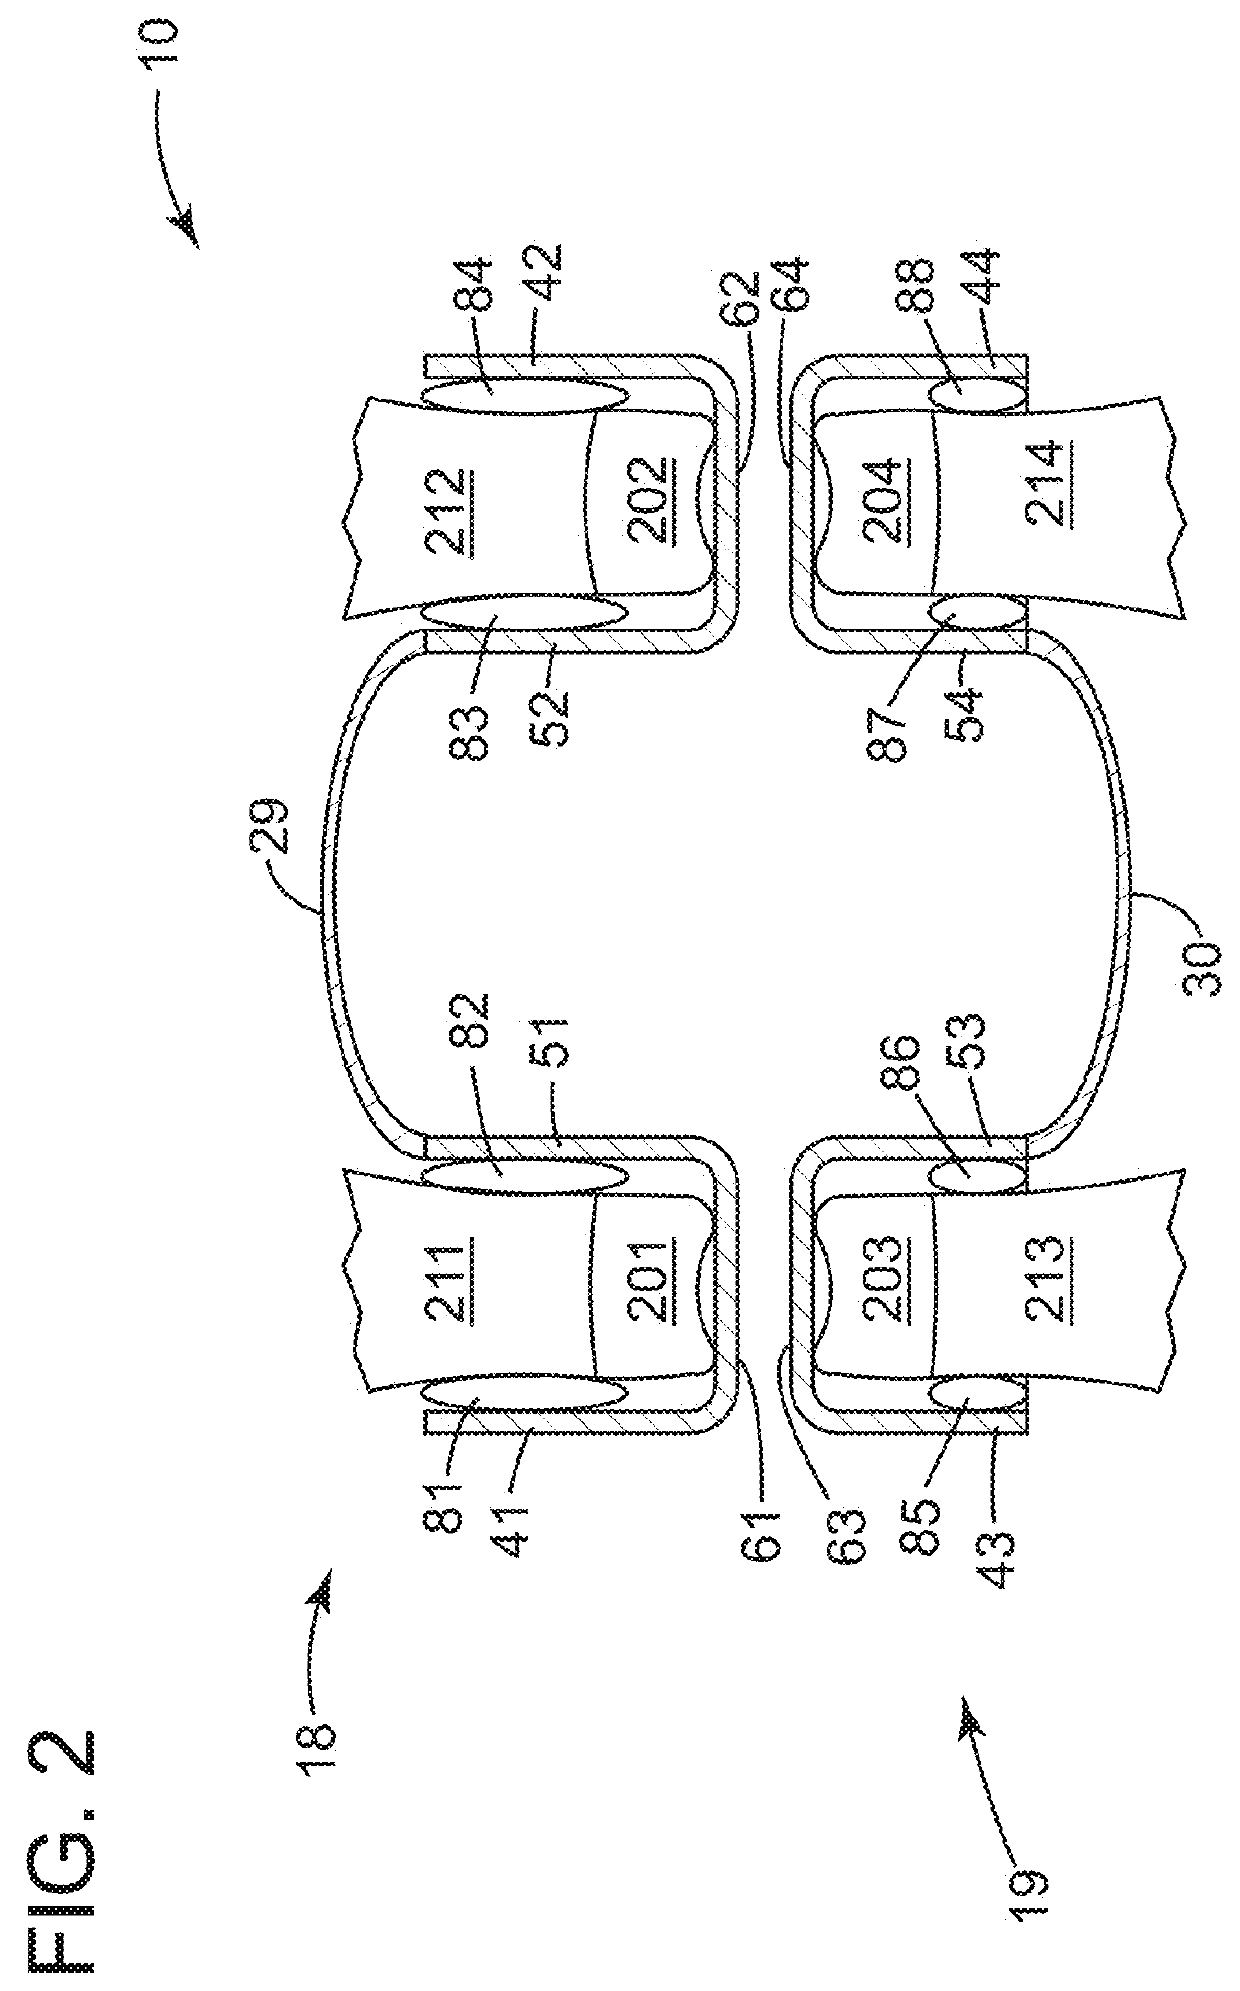 Hand-held mouthpiece for cooling of oral tissue of a user